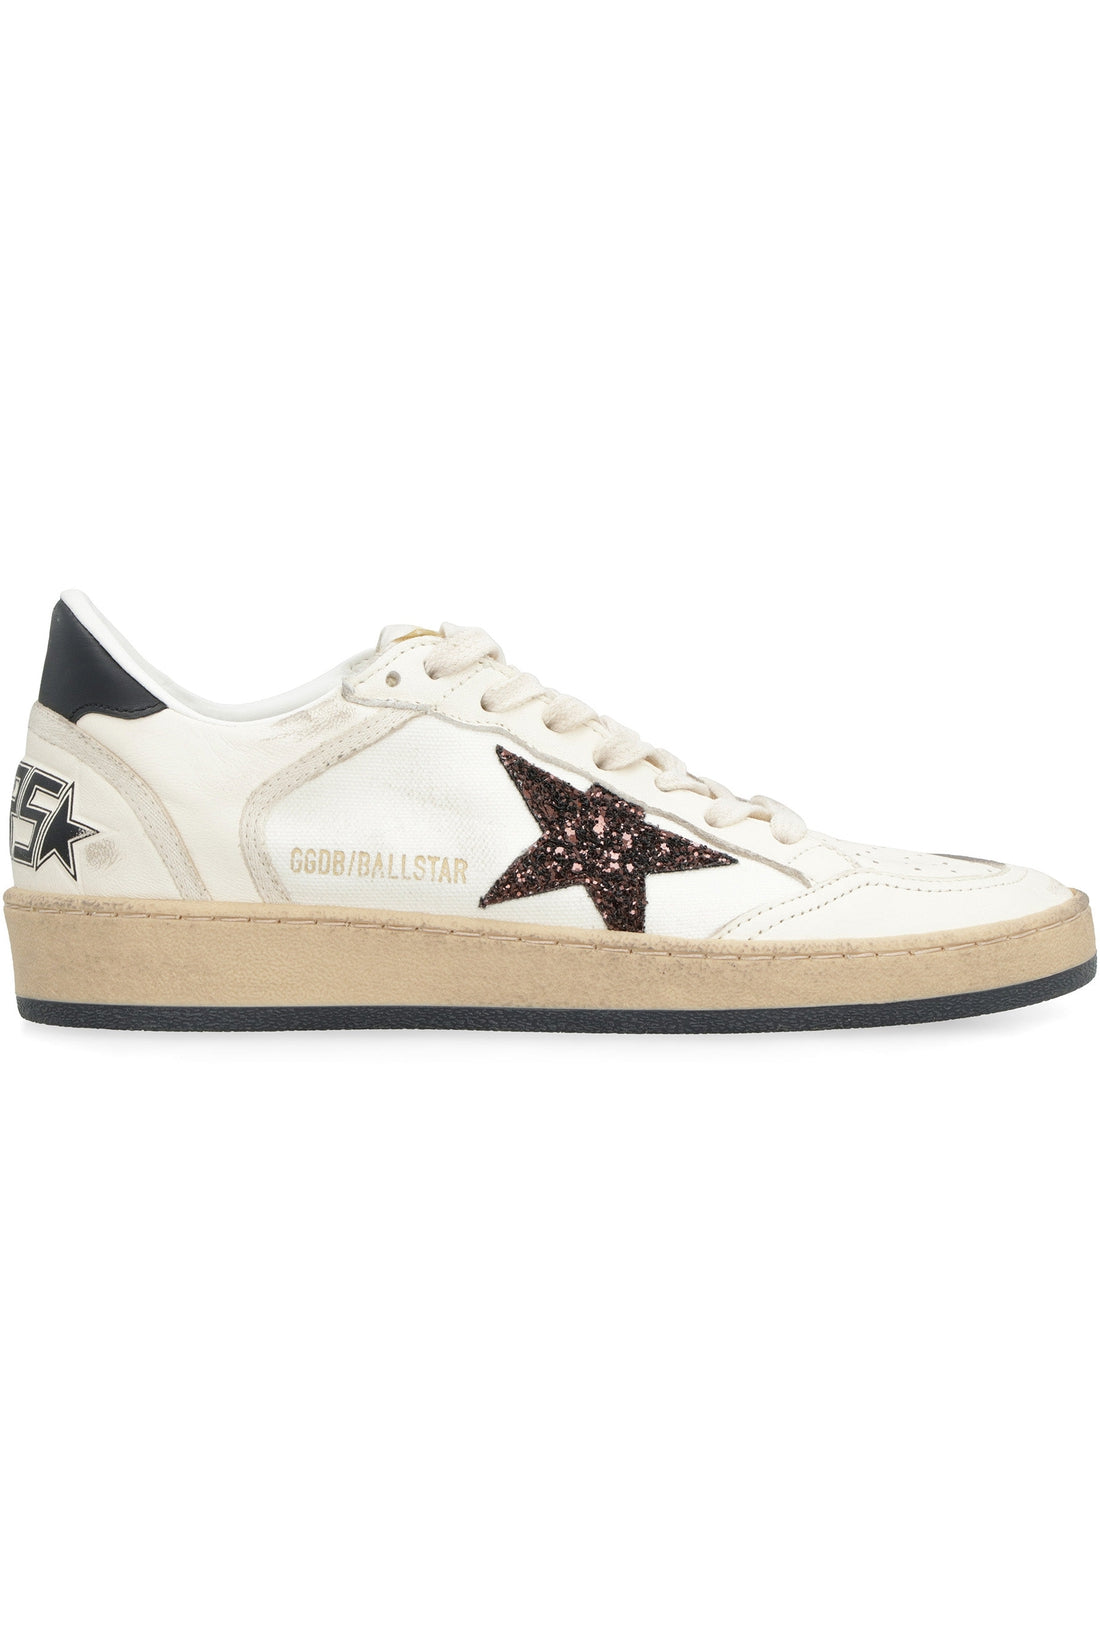 Golden Goose-OUTLET-SALE-Ball Star low-top sneakers-ARCHIVIST